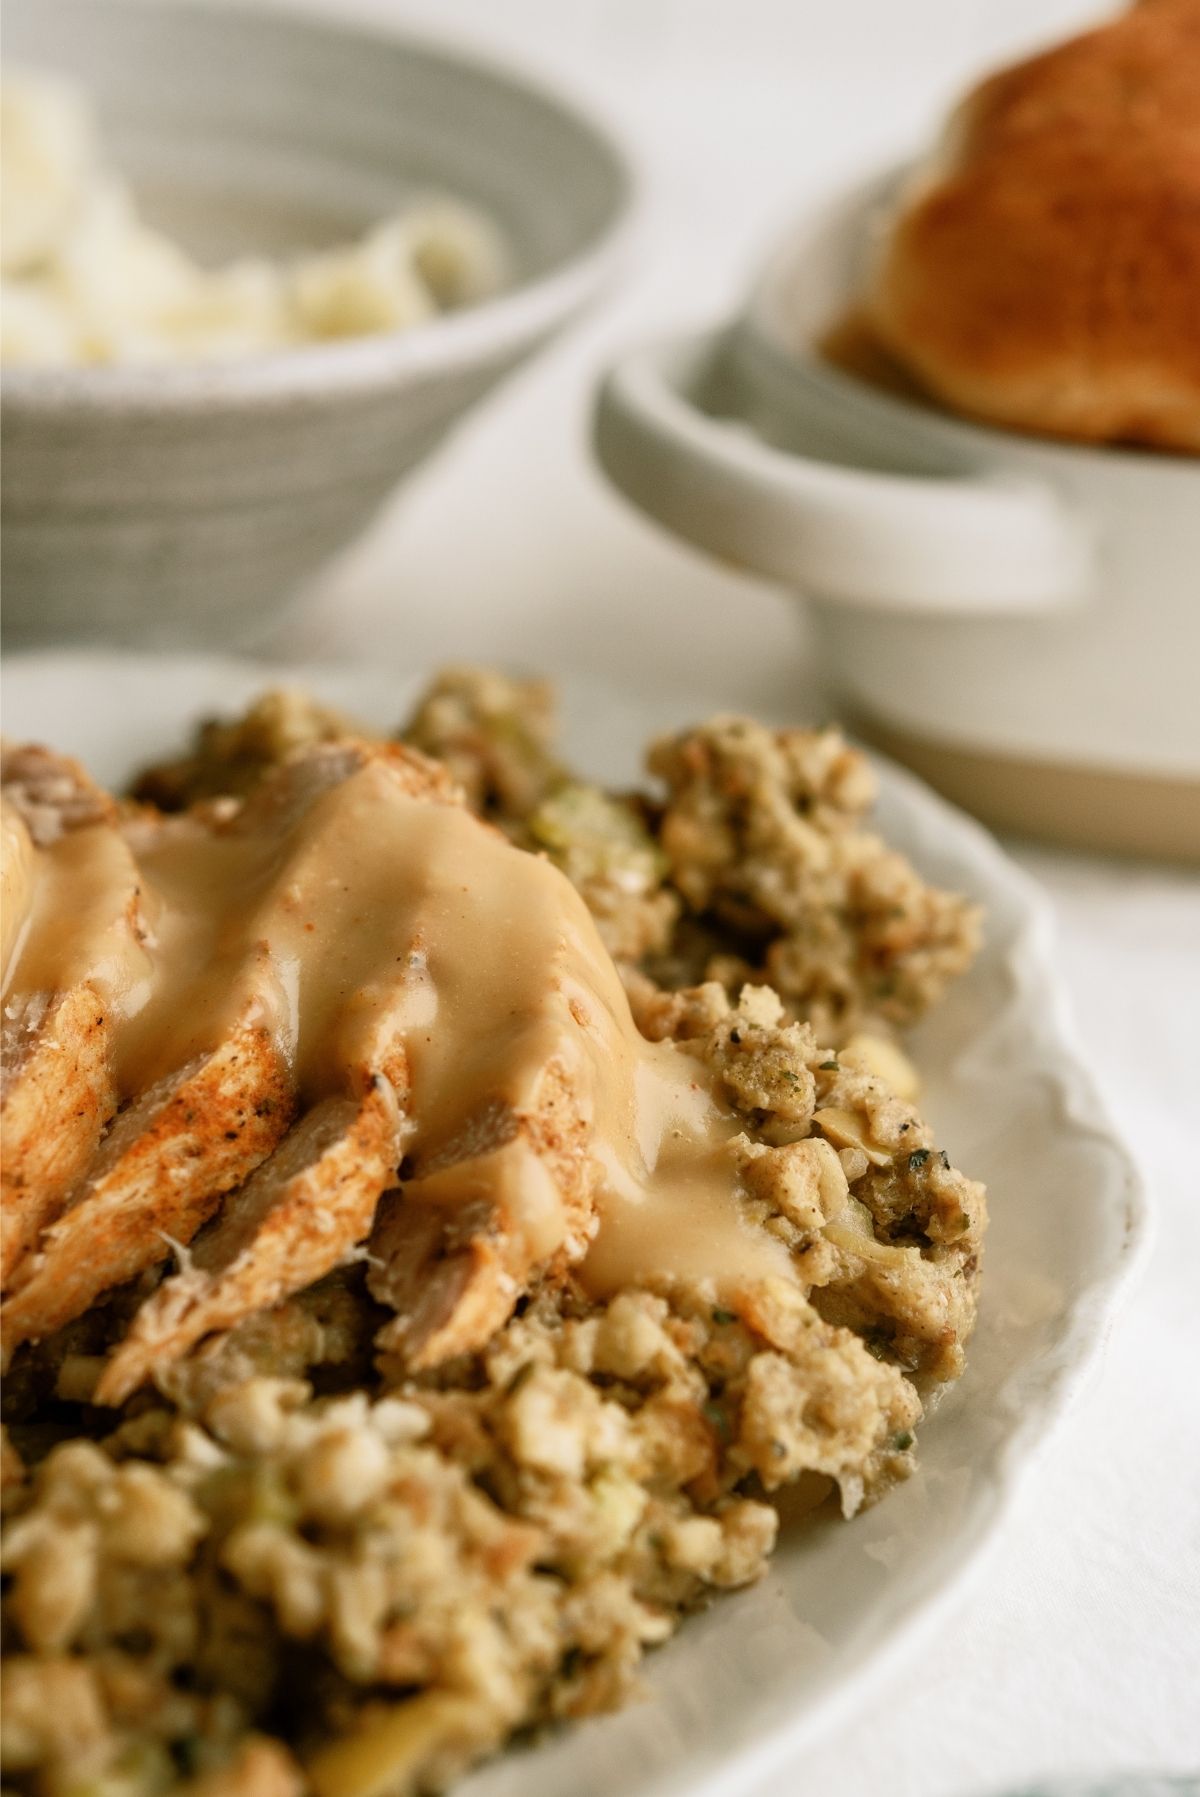 Slow Cooker Turkey and Stuffing Recipe